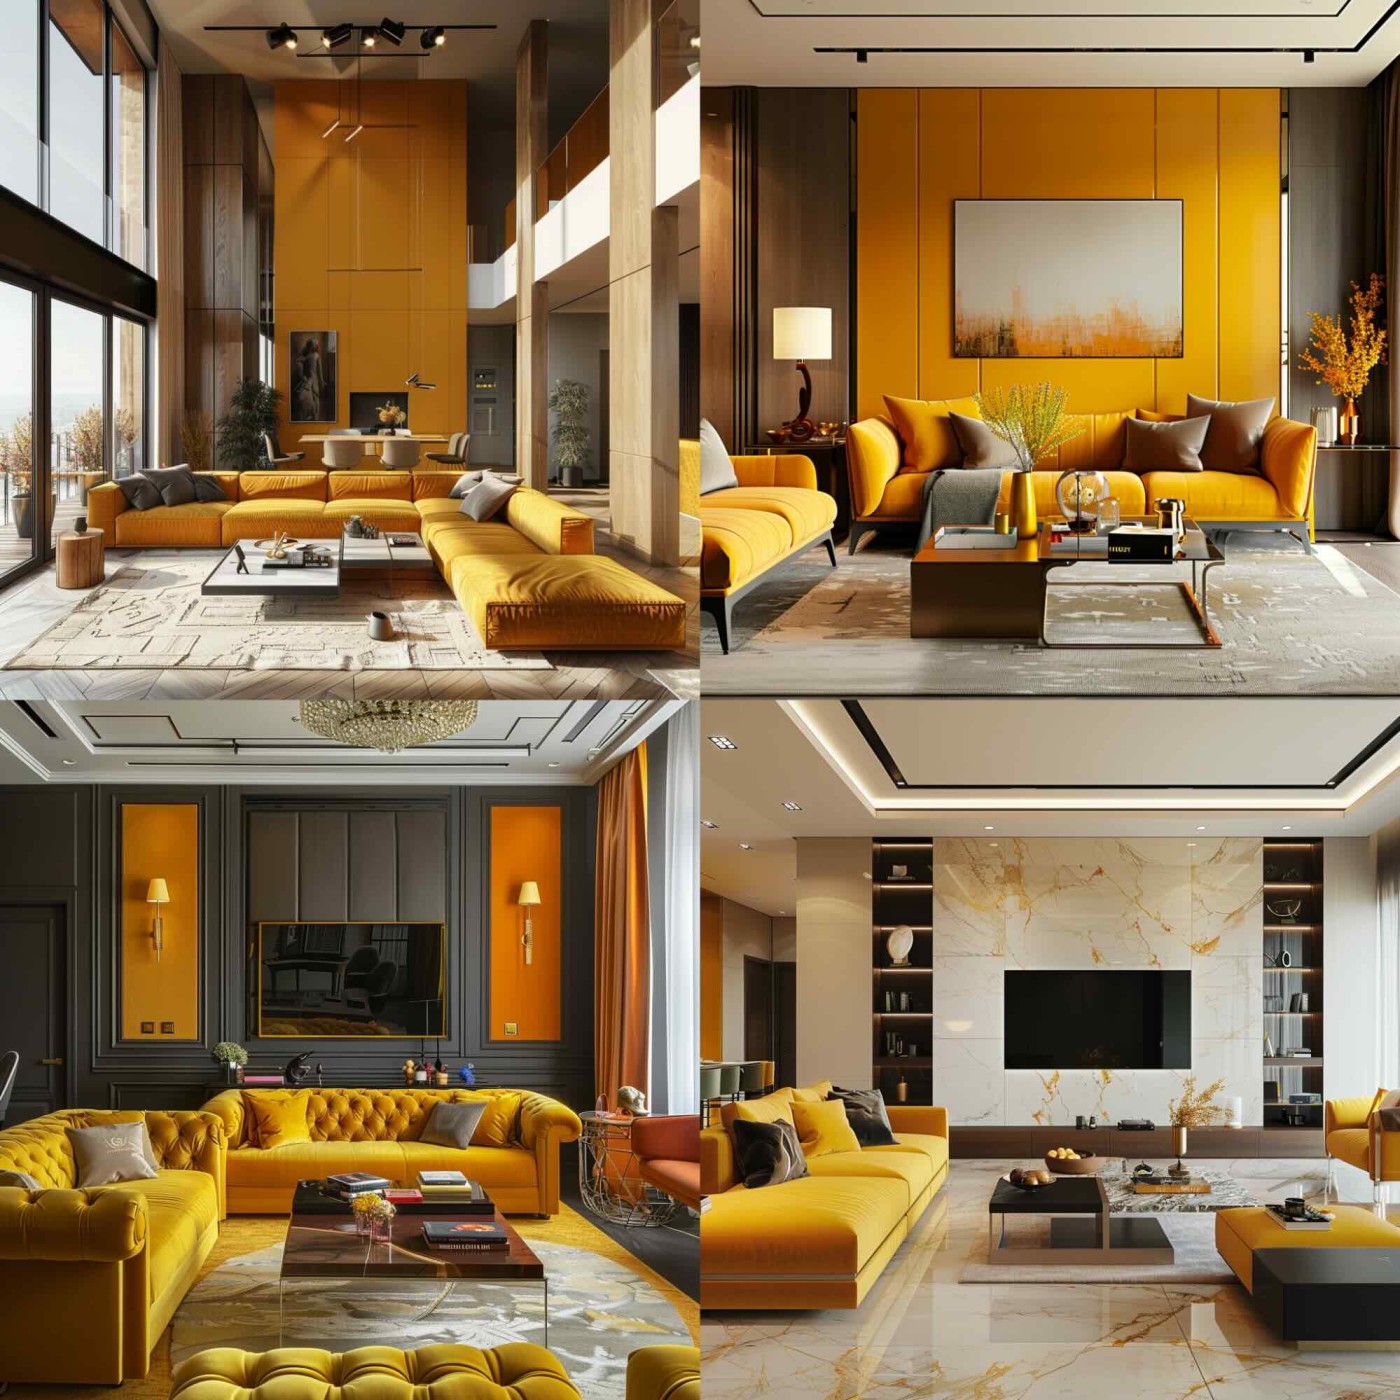 A living room in a luxury apartment, saffron yellow